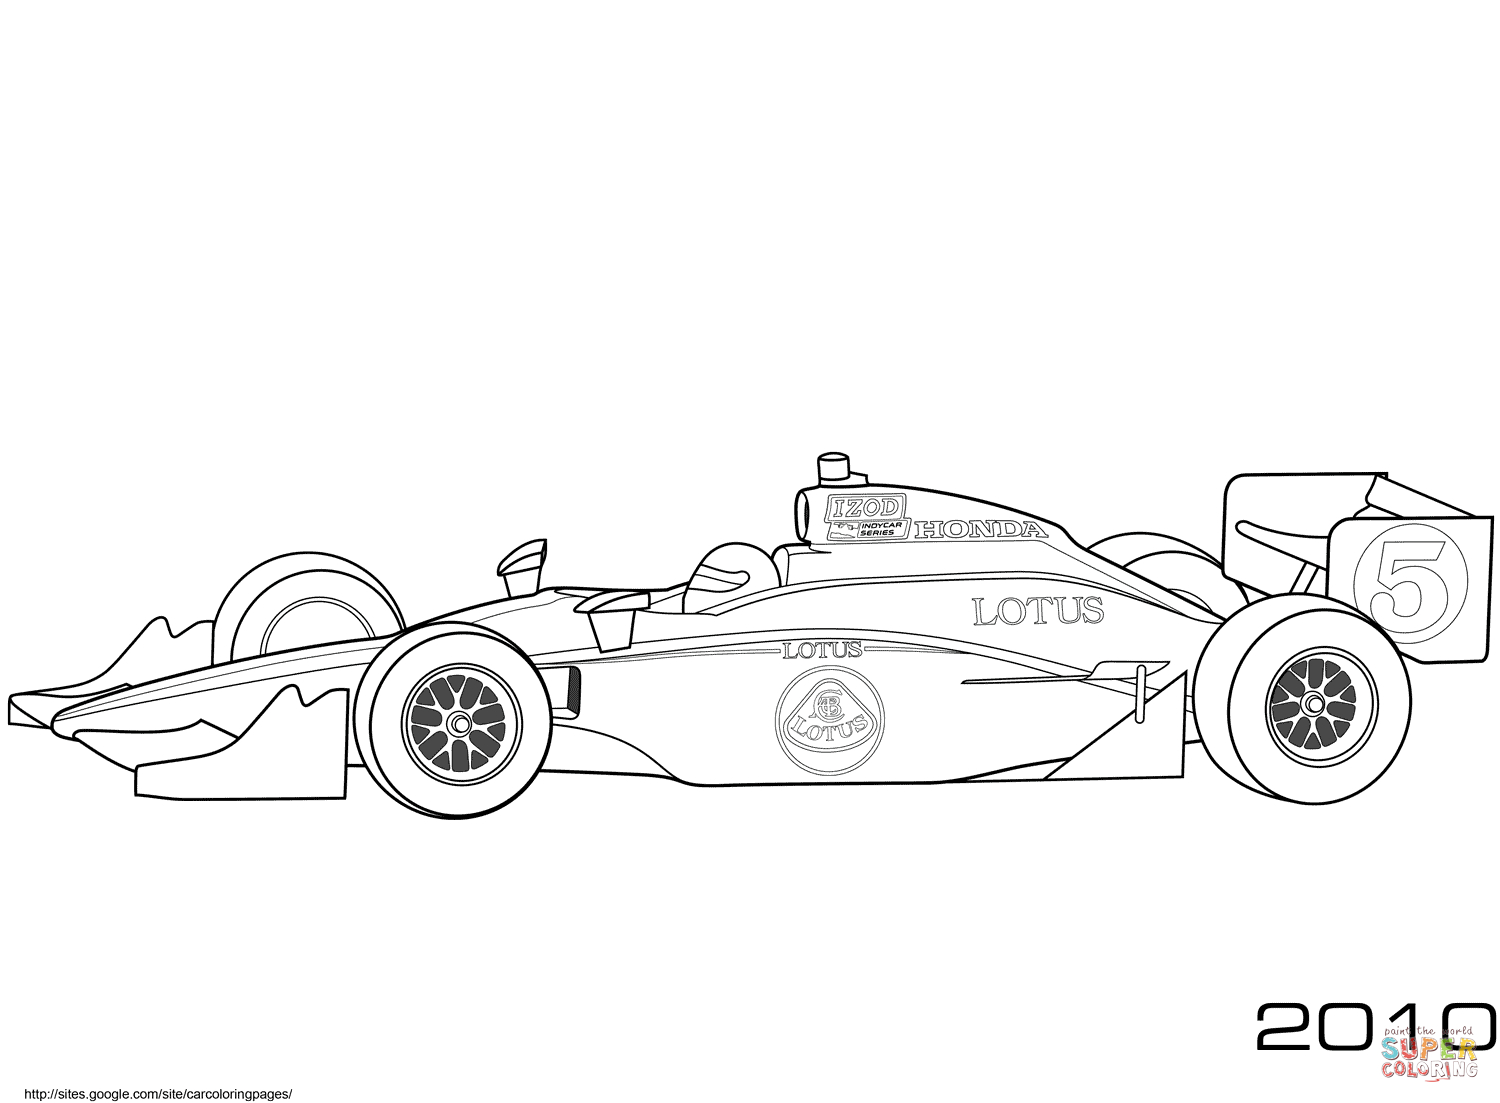 Coloring Page Of A Race Car Race Cars Coloring Pages Free Printable Pictures